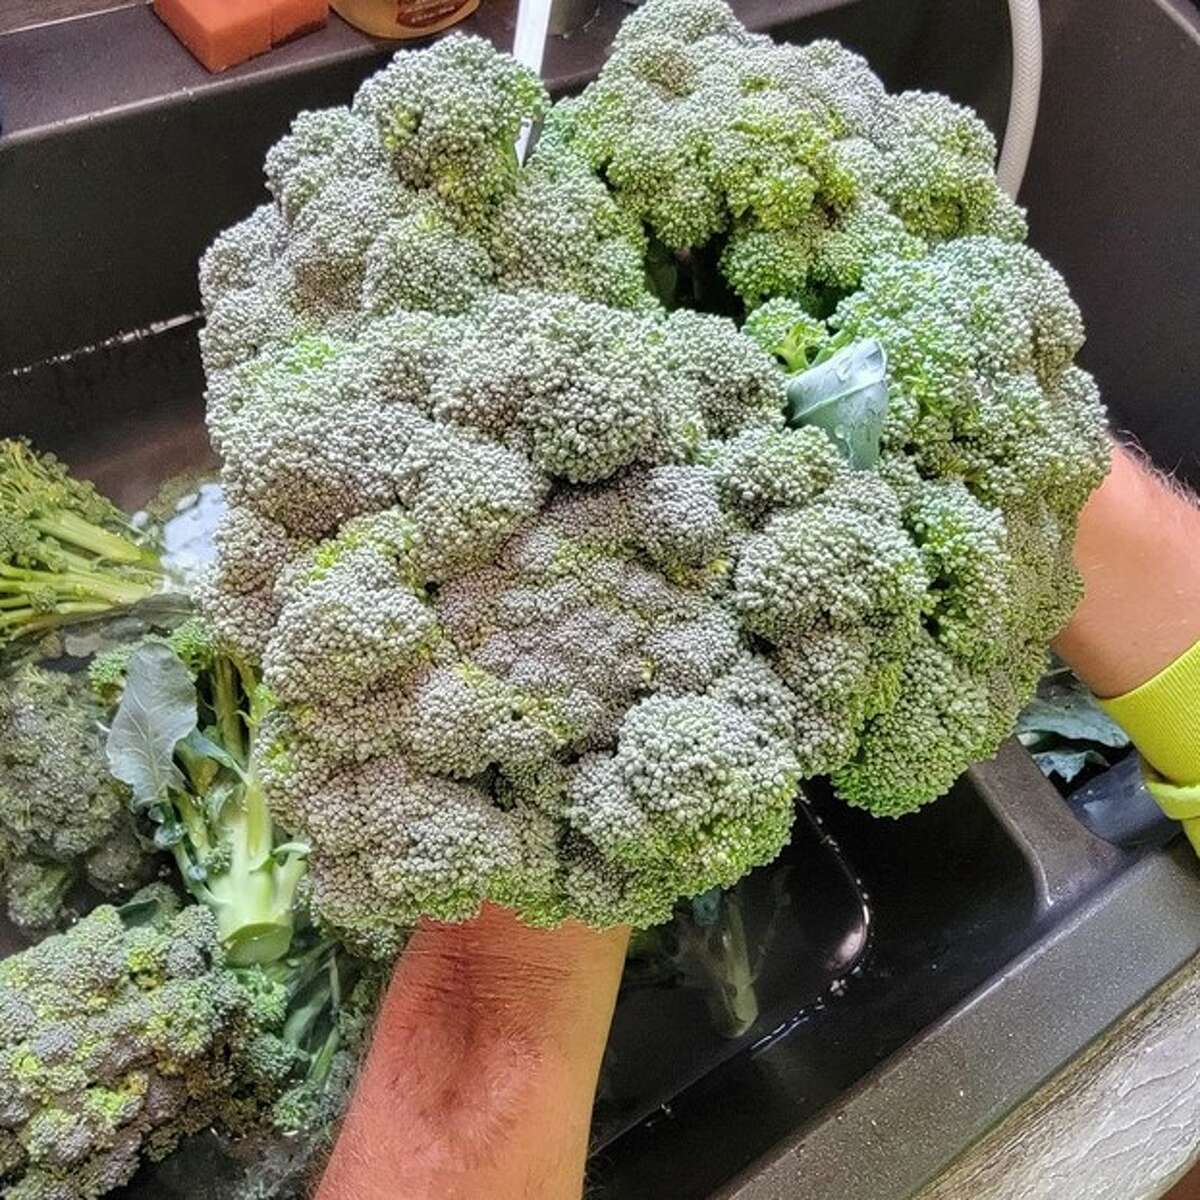 Fresh broccoli from Peterson Family Farm, which will be a vendor at the brand-new Lake Chix Market and Merch, an open-air market from 4-8 p.m. Wednesday, June 22, at the Holiday Shores Marina parking lot. 